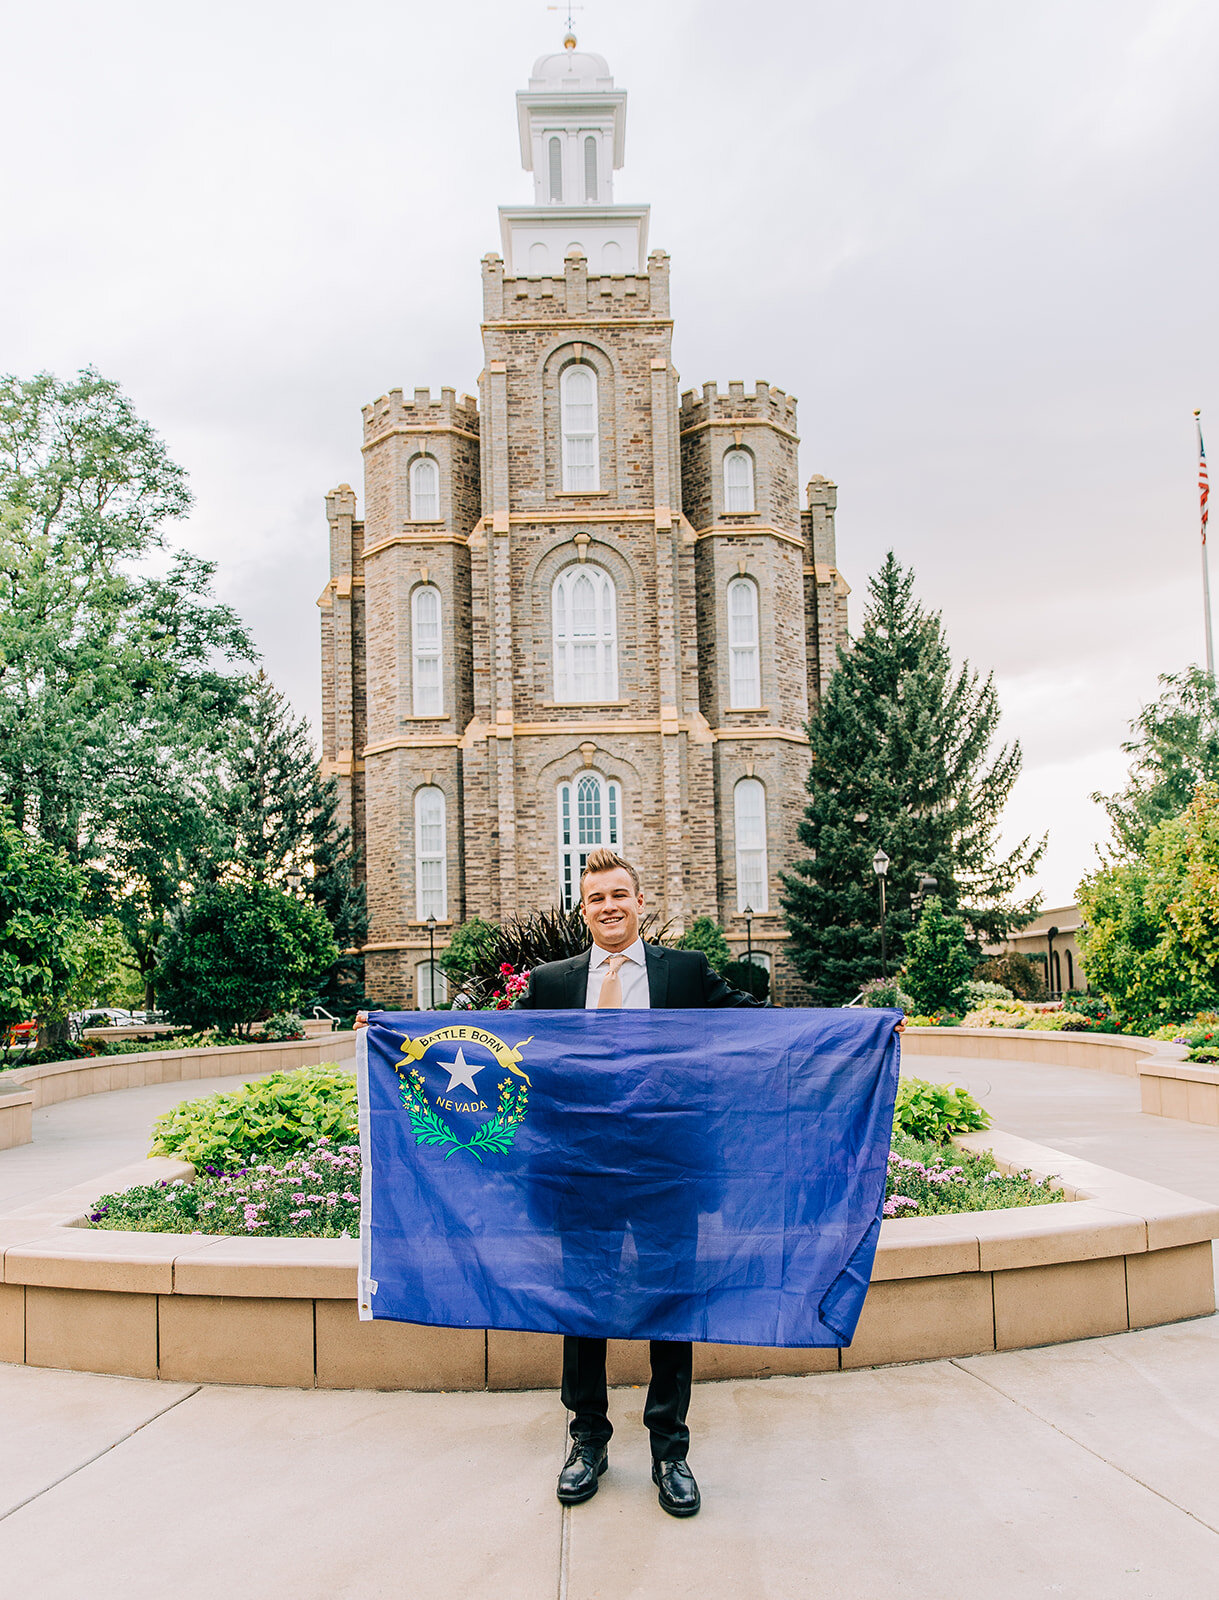  new missionary called to serve las vegas nevada state flag logan utah temple missionary pictures professional photographer bella alder photography missionary photo shoot idea #bellaalderphoto #missionary #missionaryportraits #missionpics #missionary